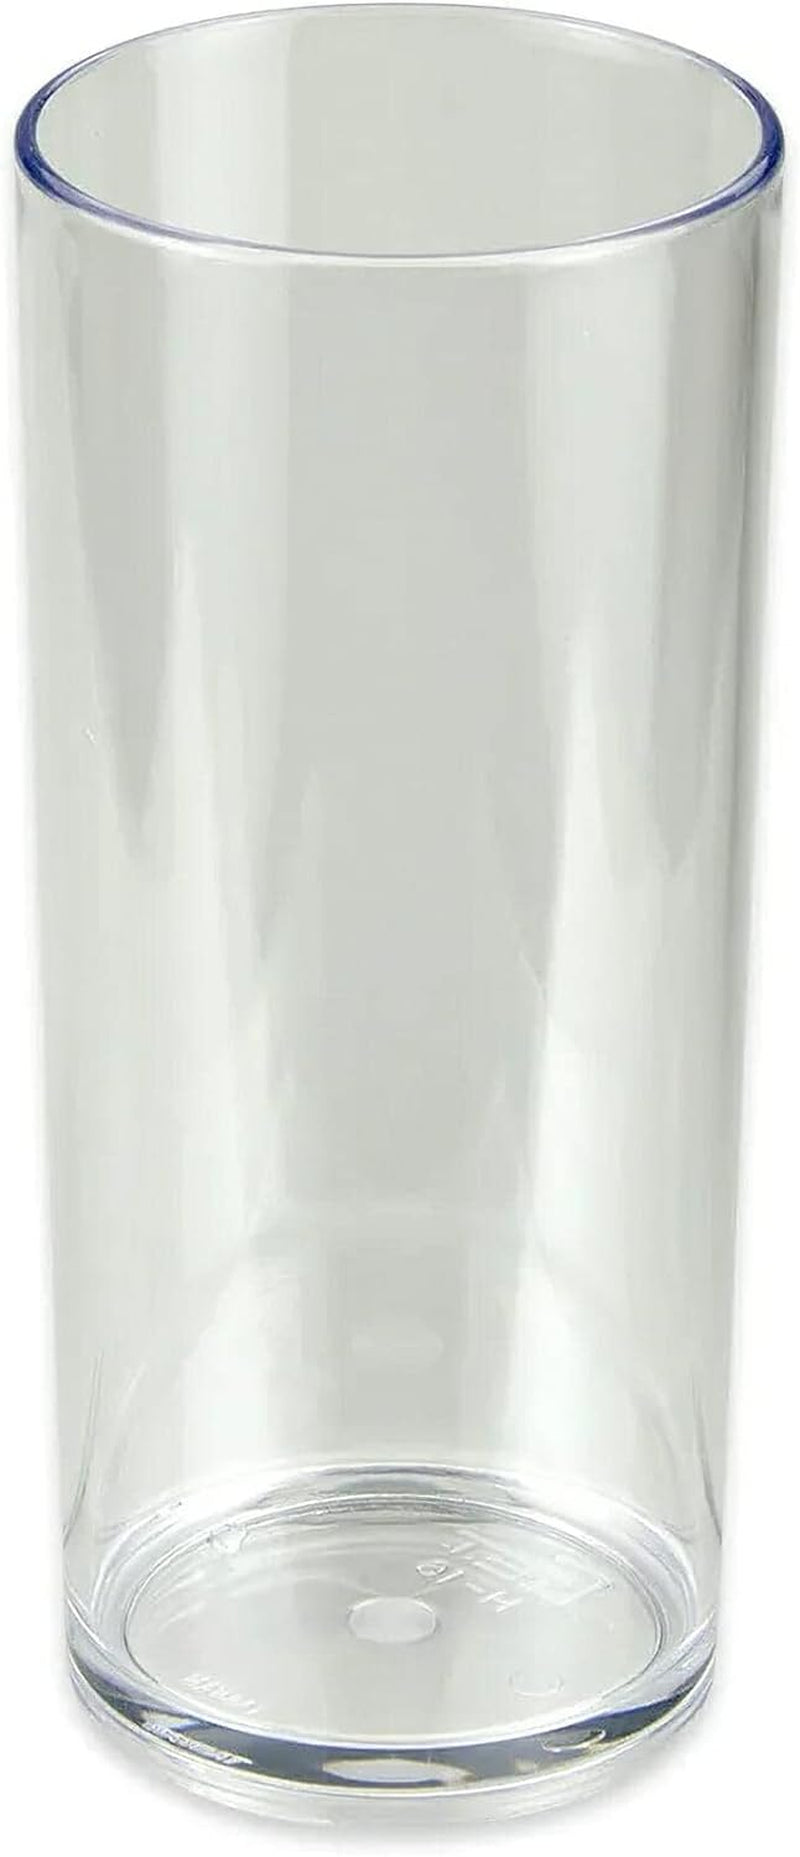 G.E.T. 9-1-SAN-CL-EC Cheers BPA-Free Plastic Highball Glasses, 9 Ounce, Clear, Small (Set of 4)